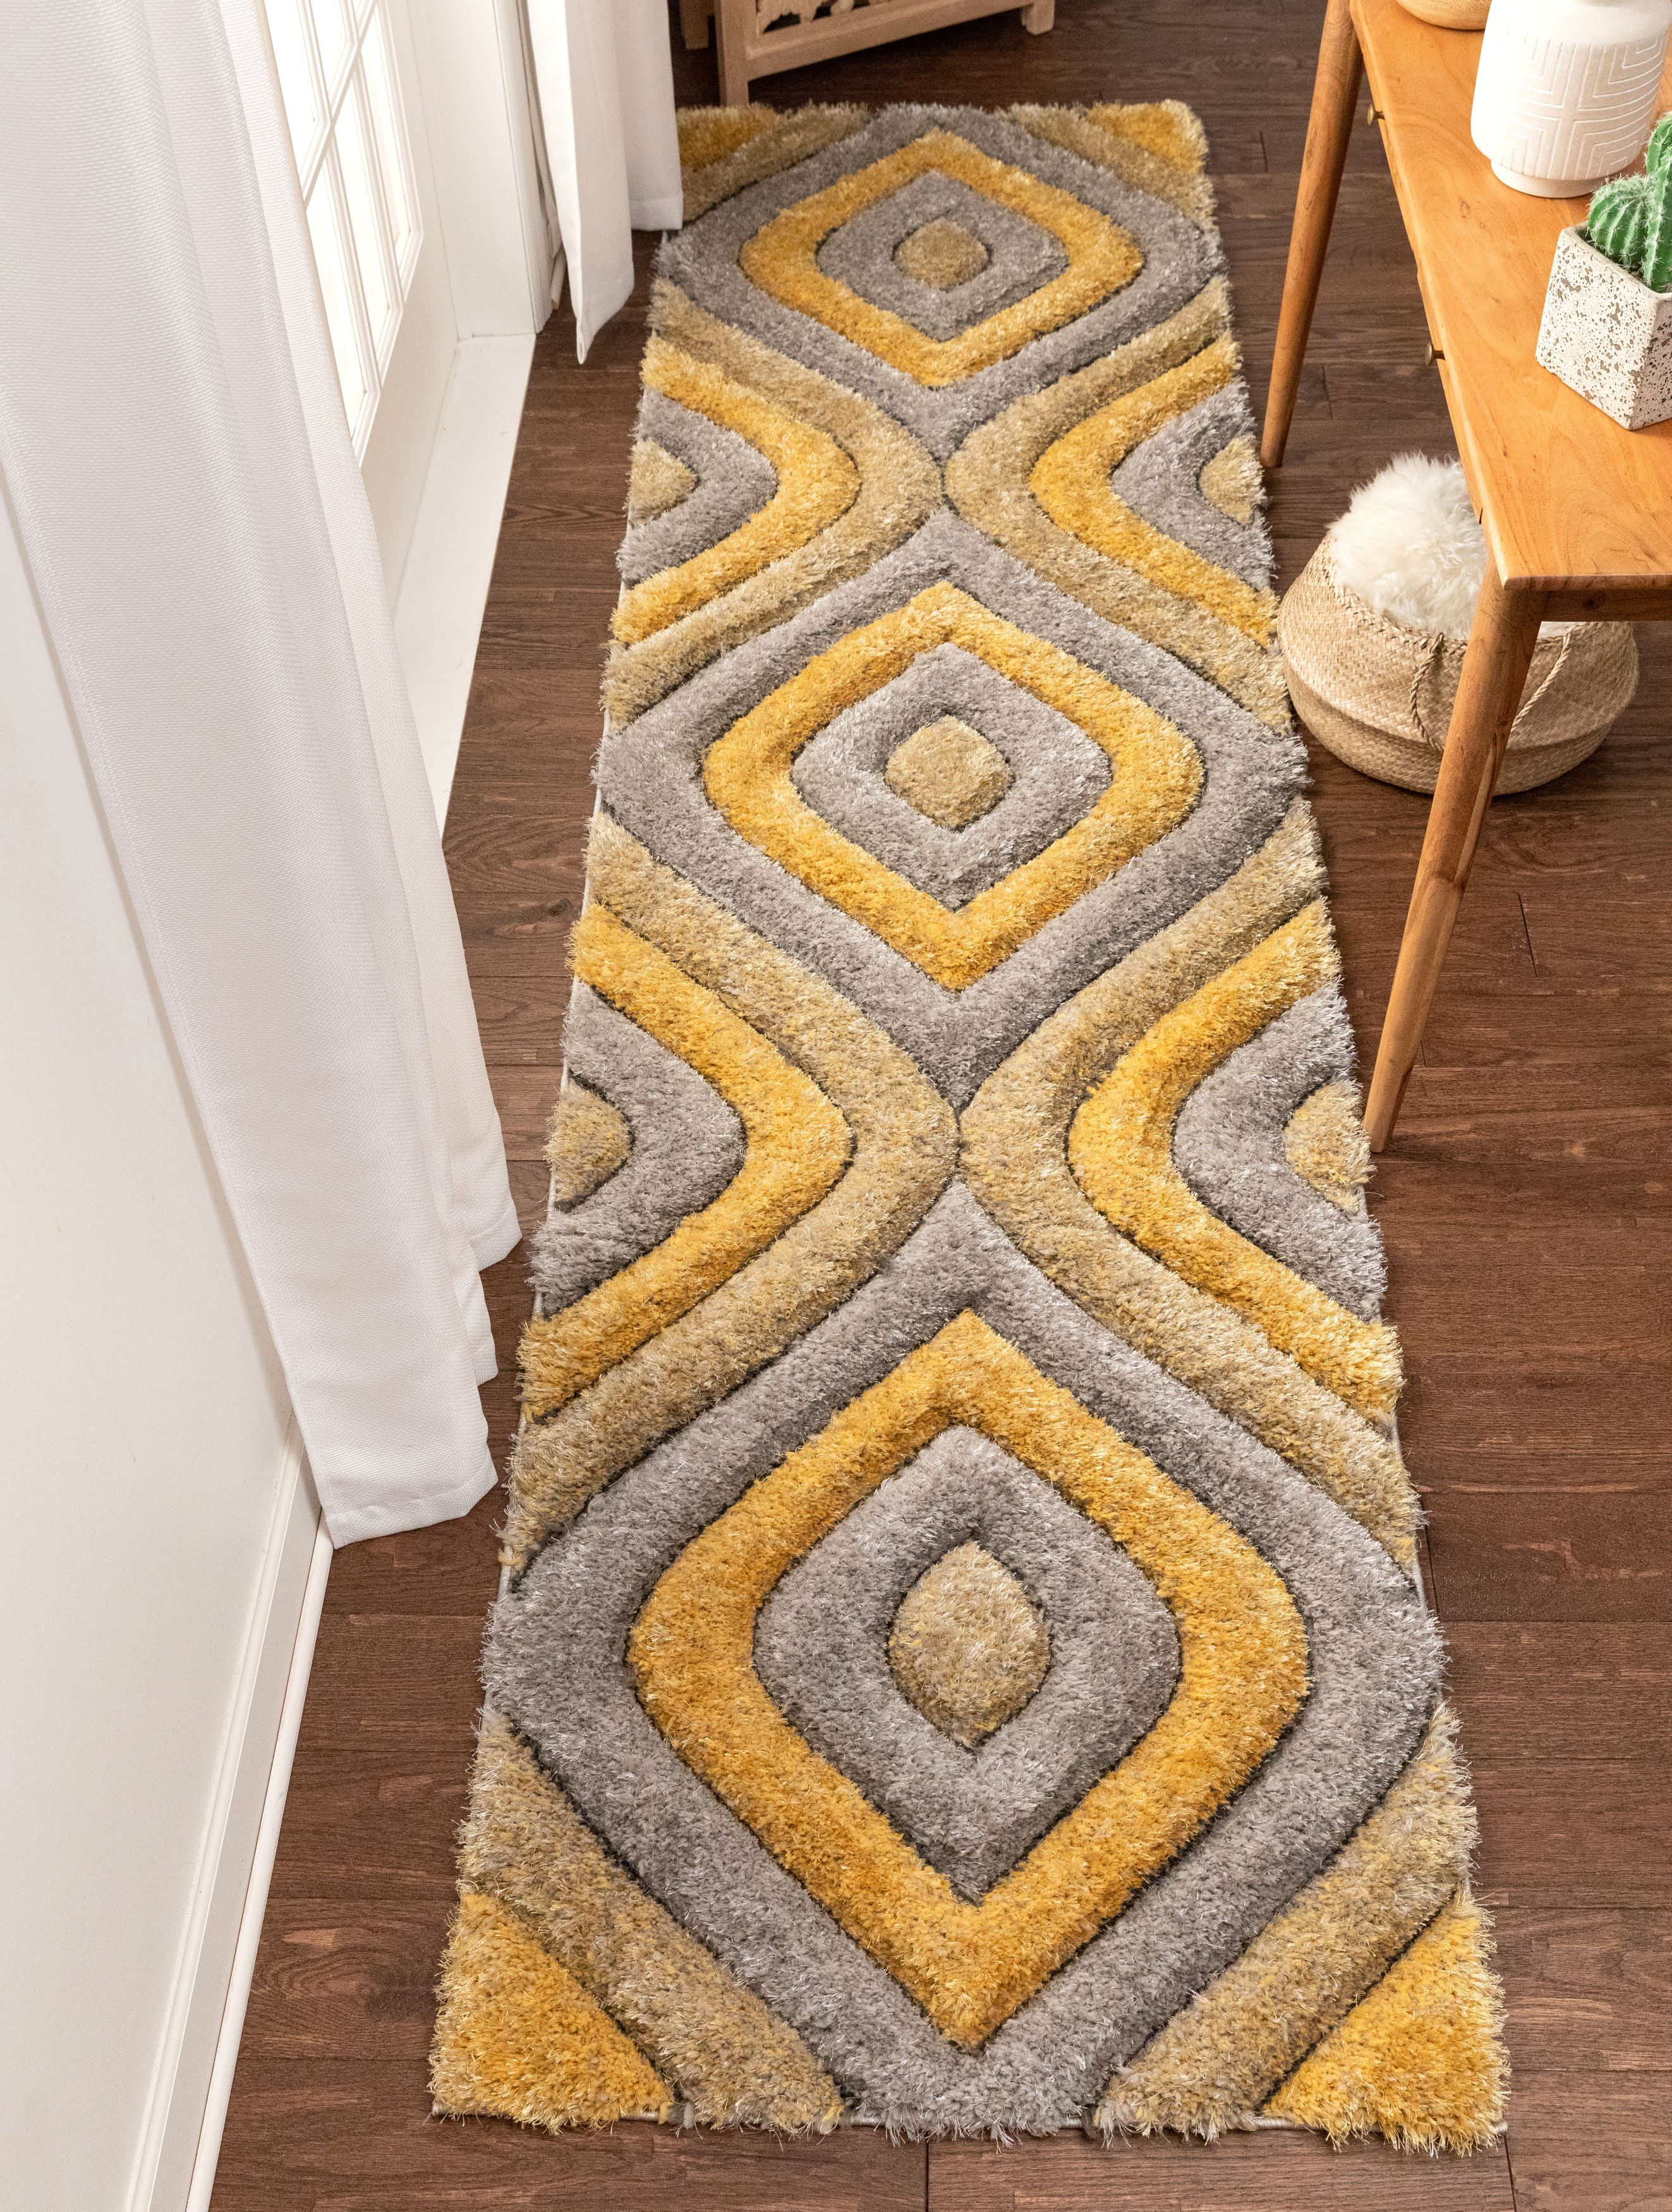 Quality Bright Thick Soft Carved Ochre Mustard Rugs Long Hallway Runner Mats Rug 